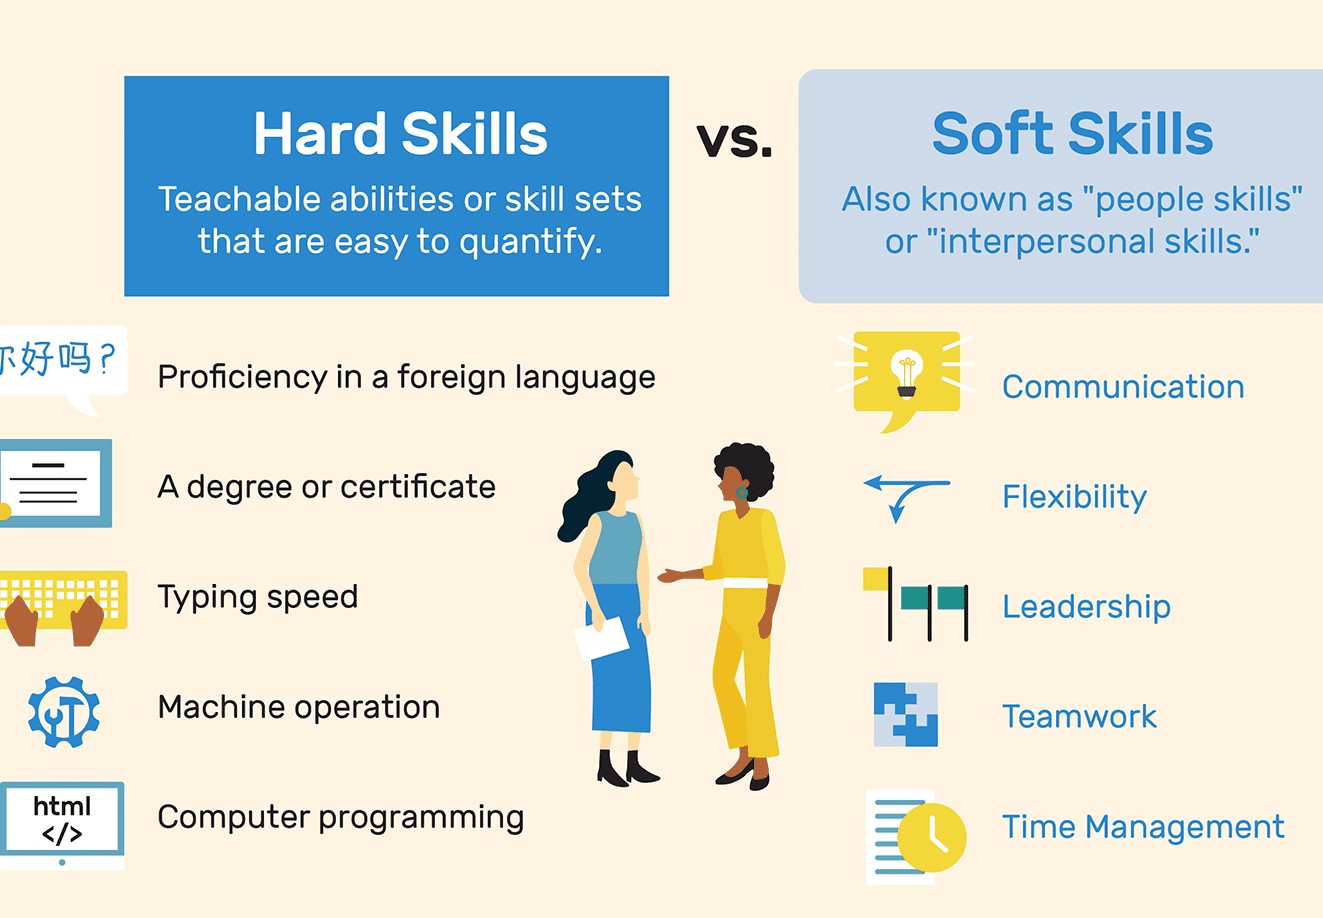 transferable skills critical thinking examples